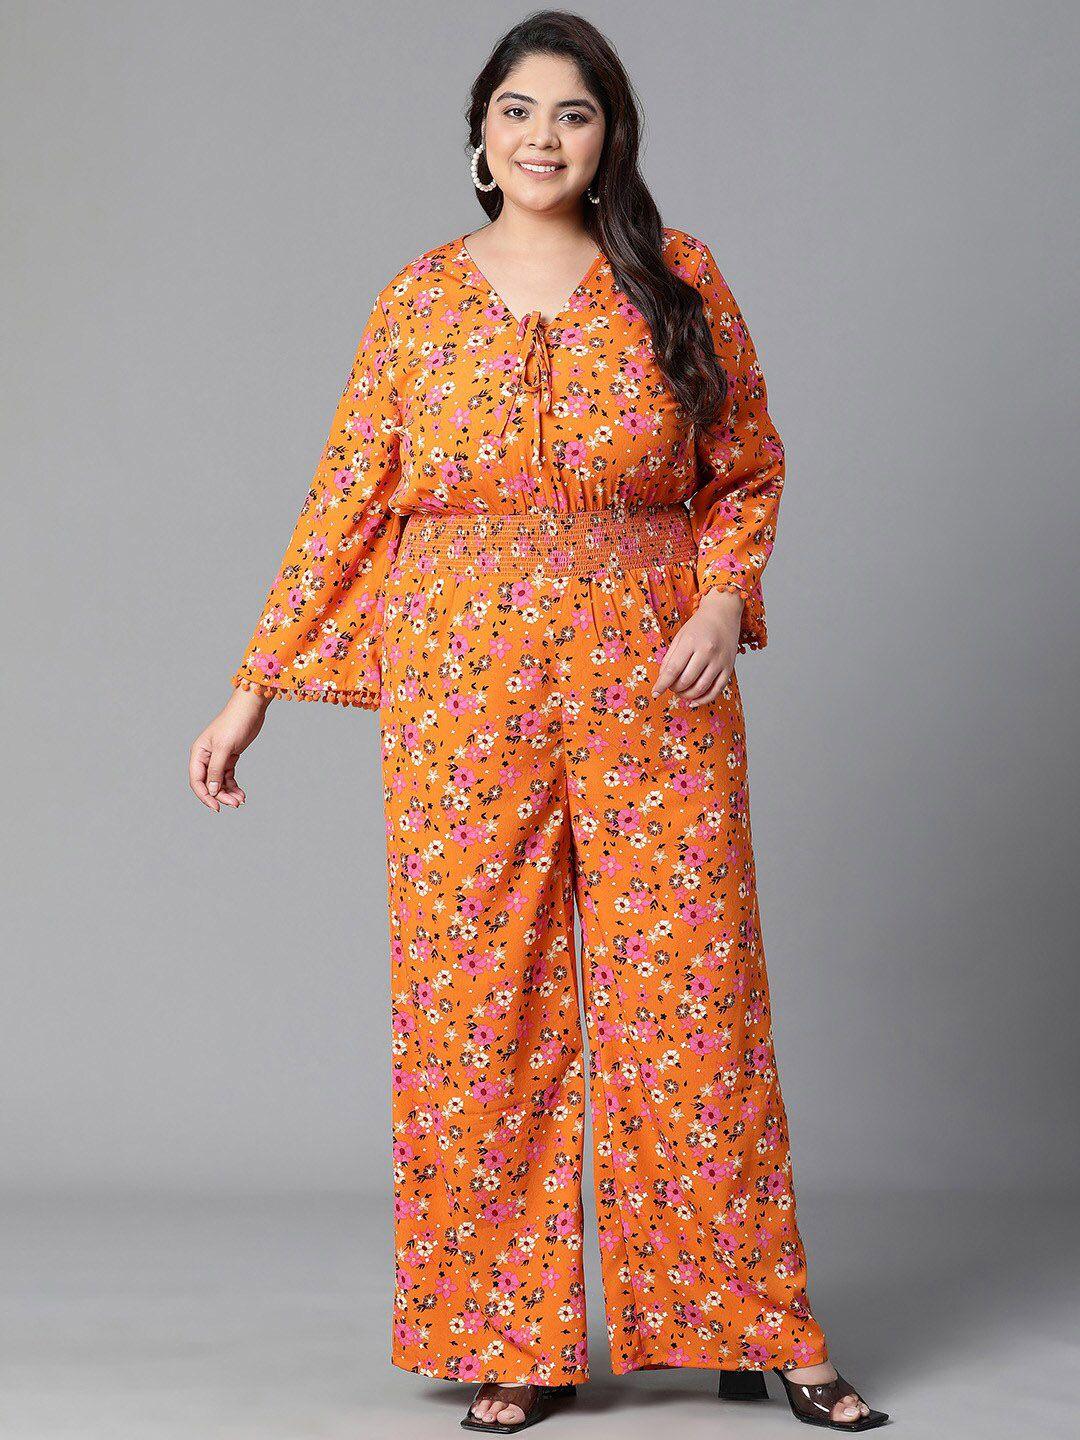 oxolloxo-plus-size-printed-tie-knot-smocked-basic-jumpsuit